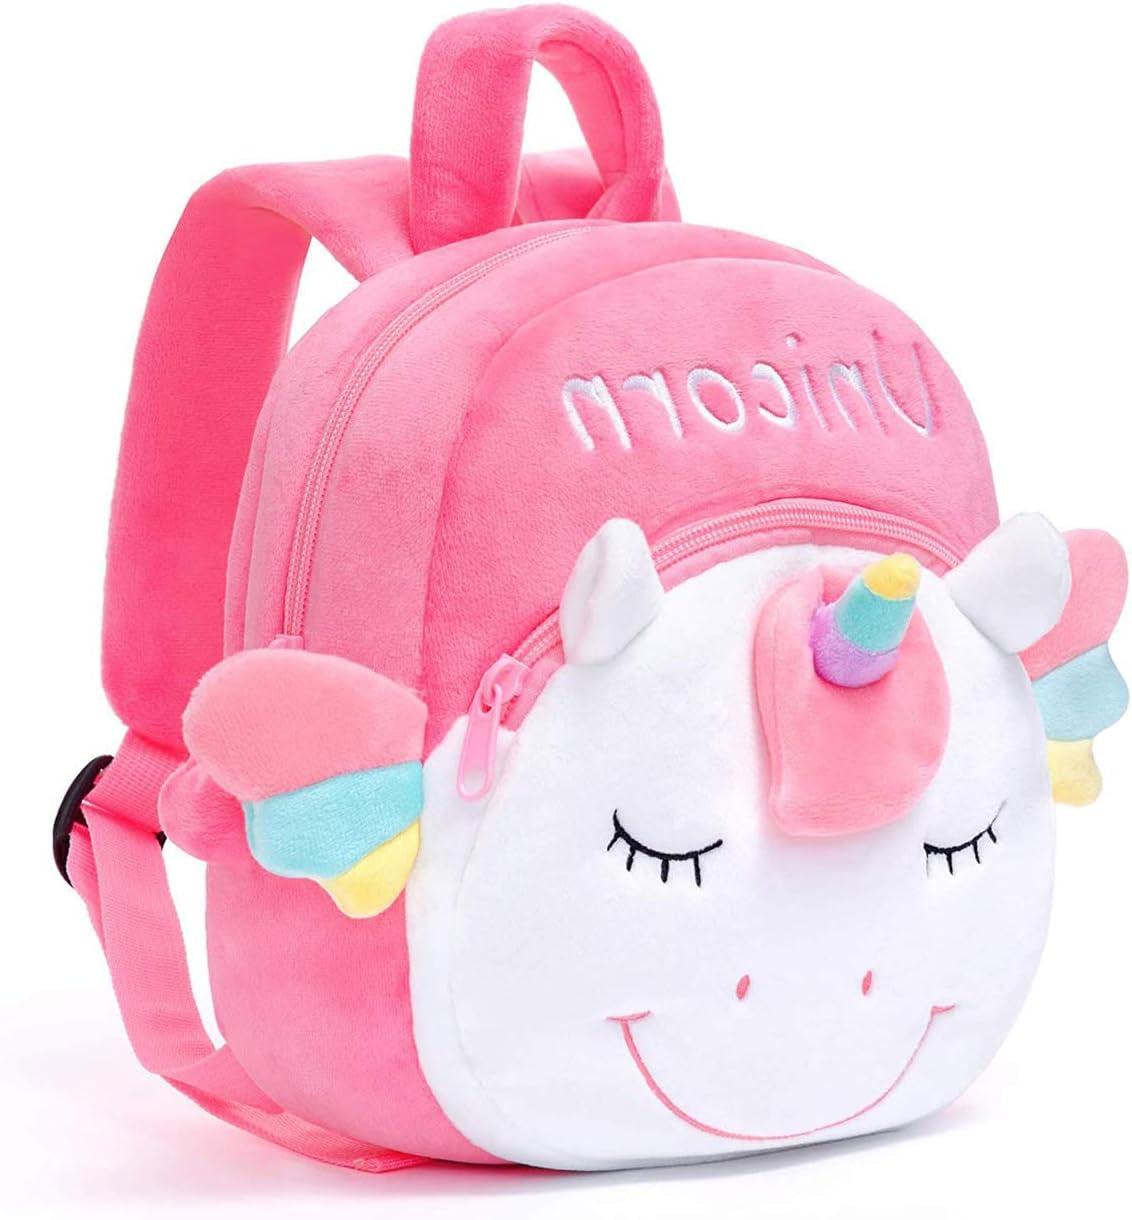 Unicorn Backpacks Kid'S Back Pack Plush Bag Toy Gifts for Kids Girls Baby Double Layer (Pink Unicorn)